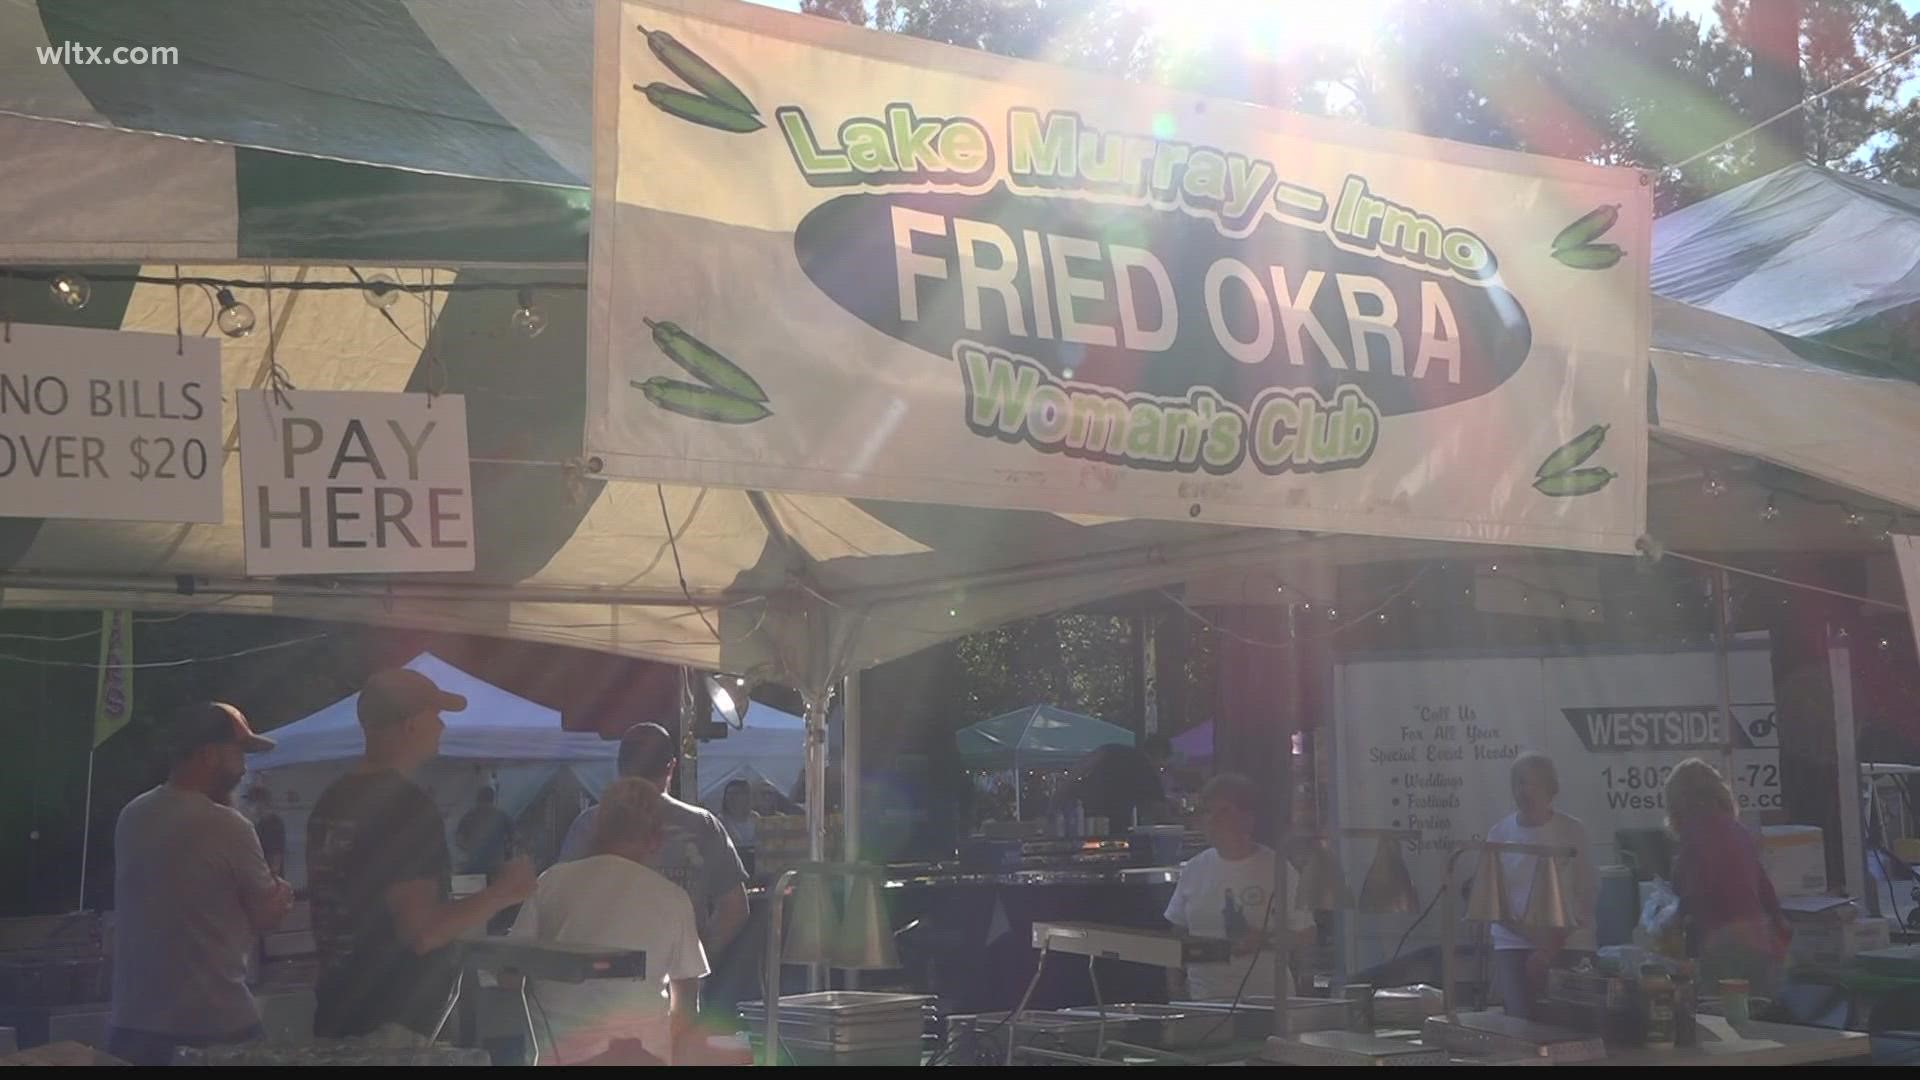 The Irmo Okra Strut returns this year, with COVID-19 protocols in place.